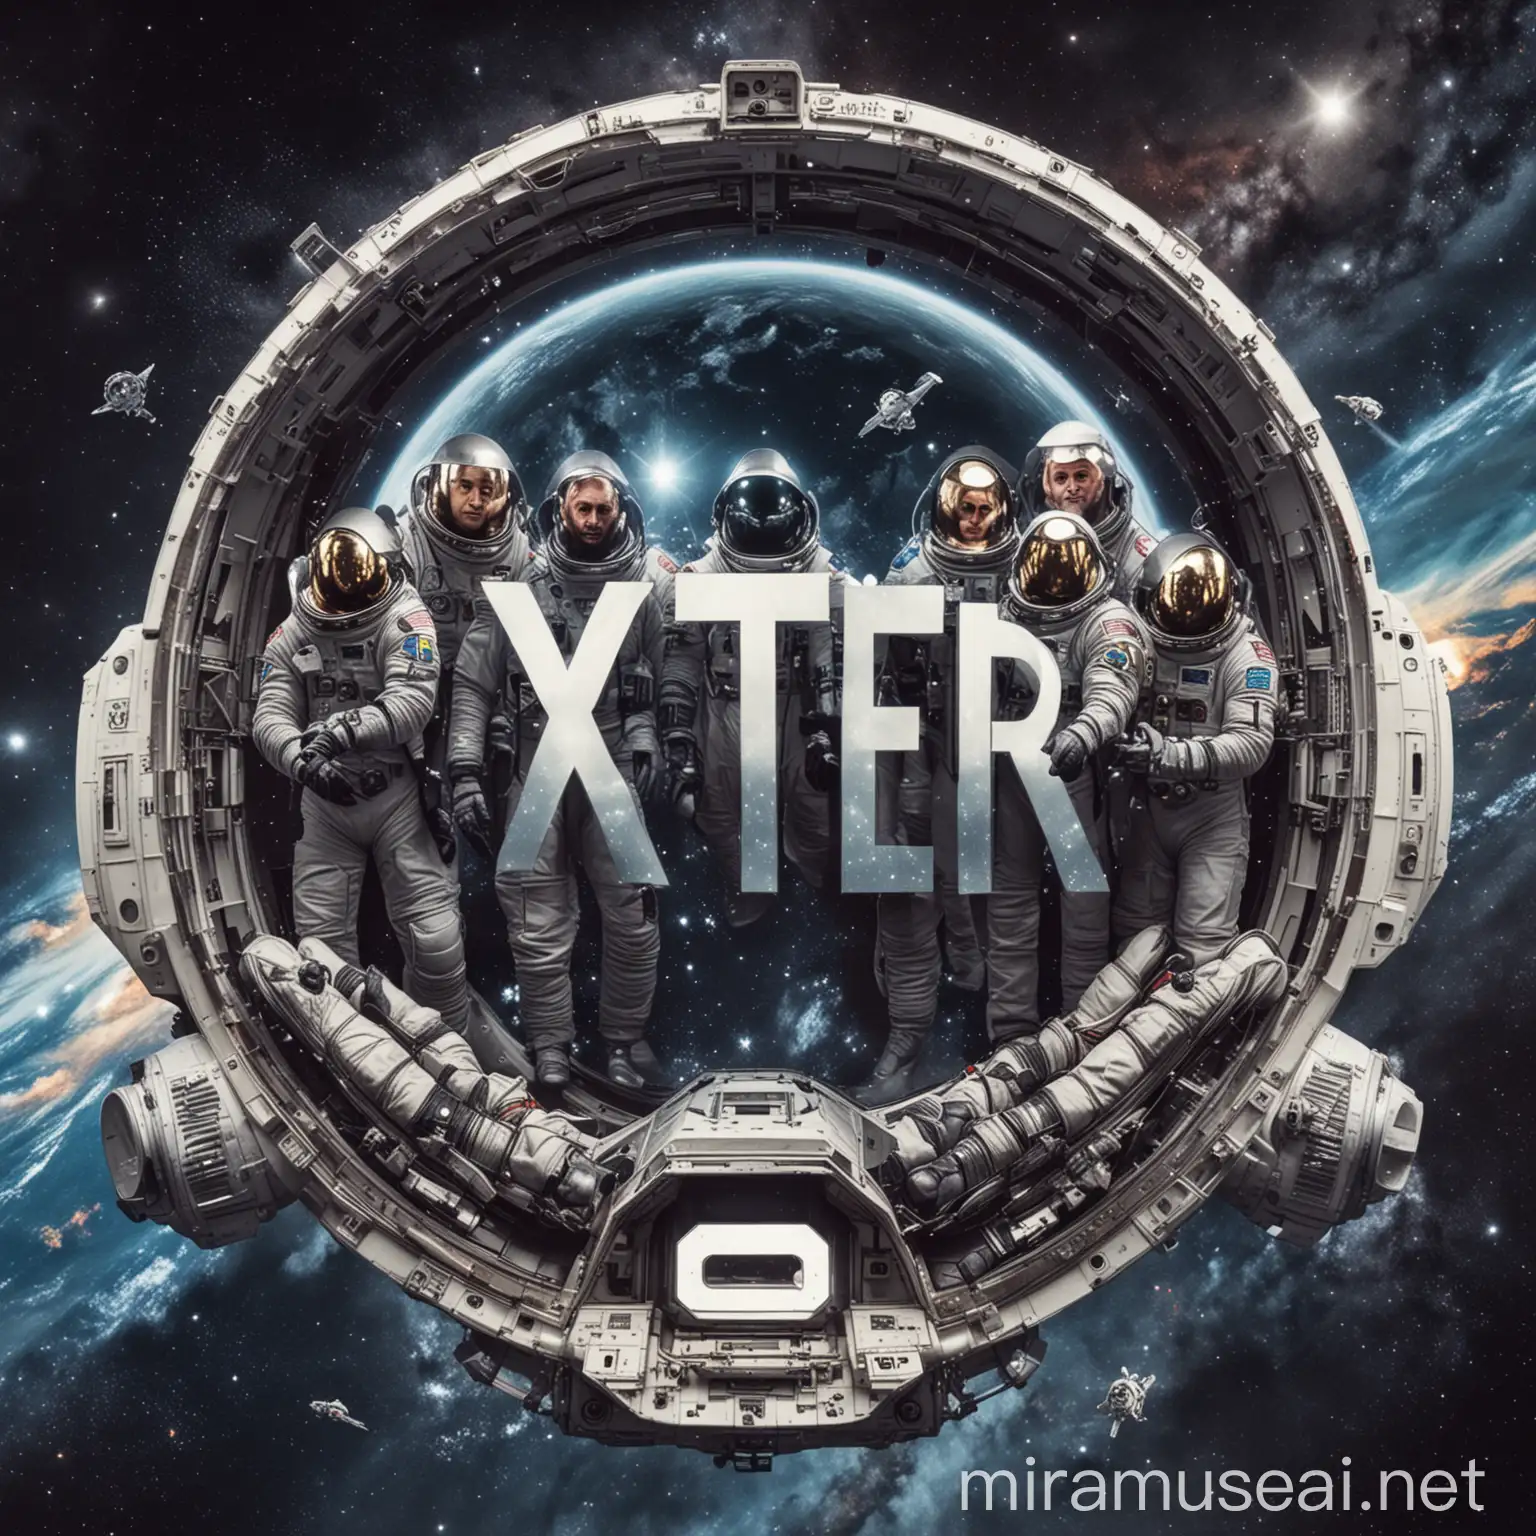 Create an image of people in space withe $XTER LOGO on the space ship
Let it show the space men